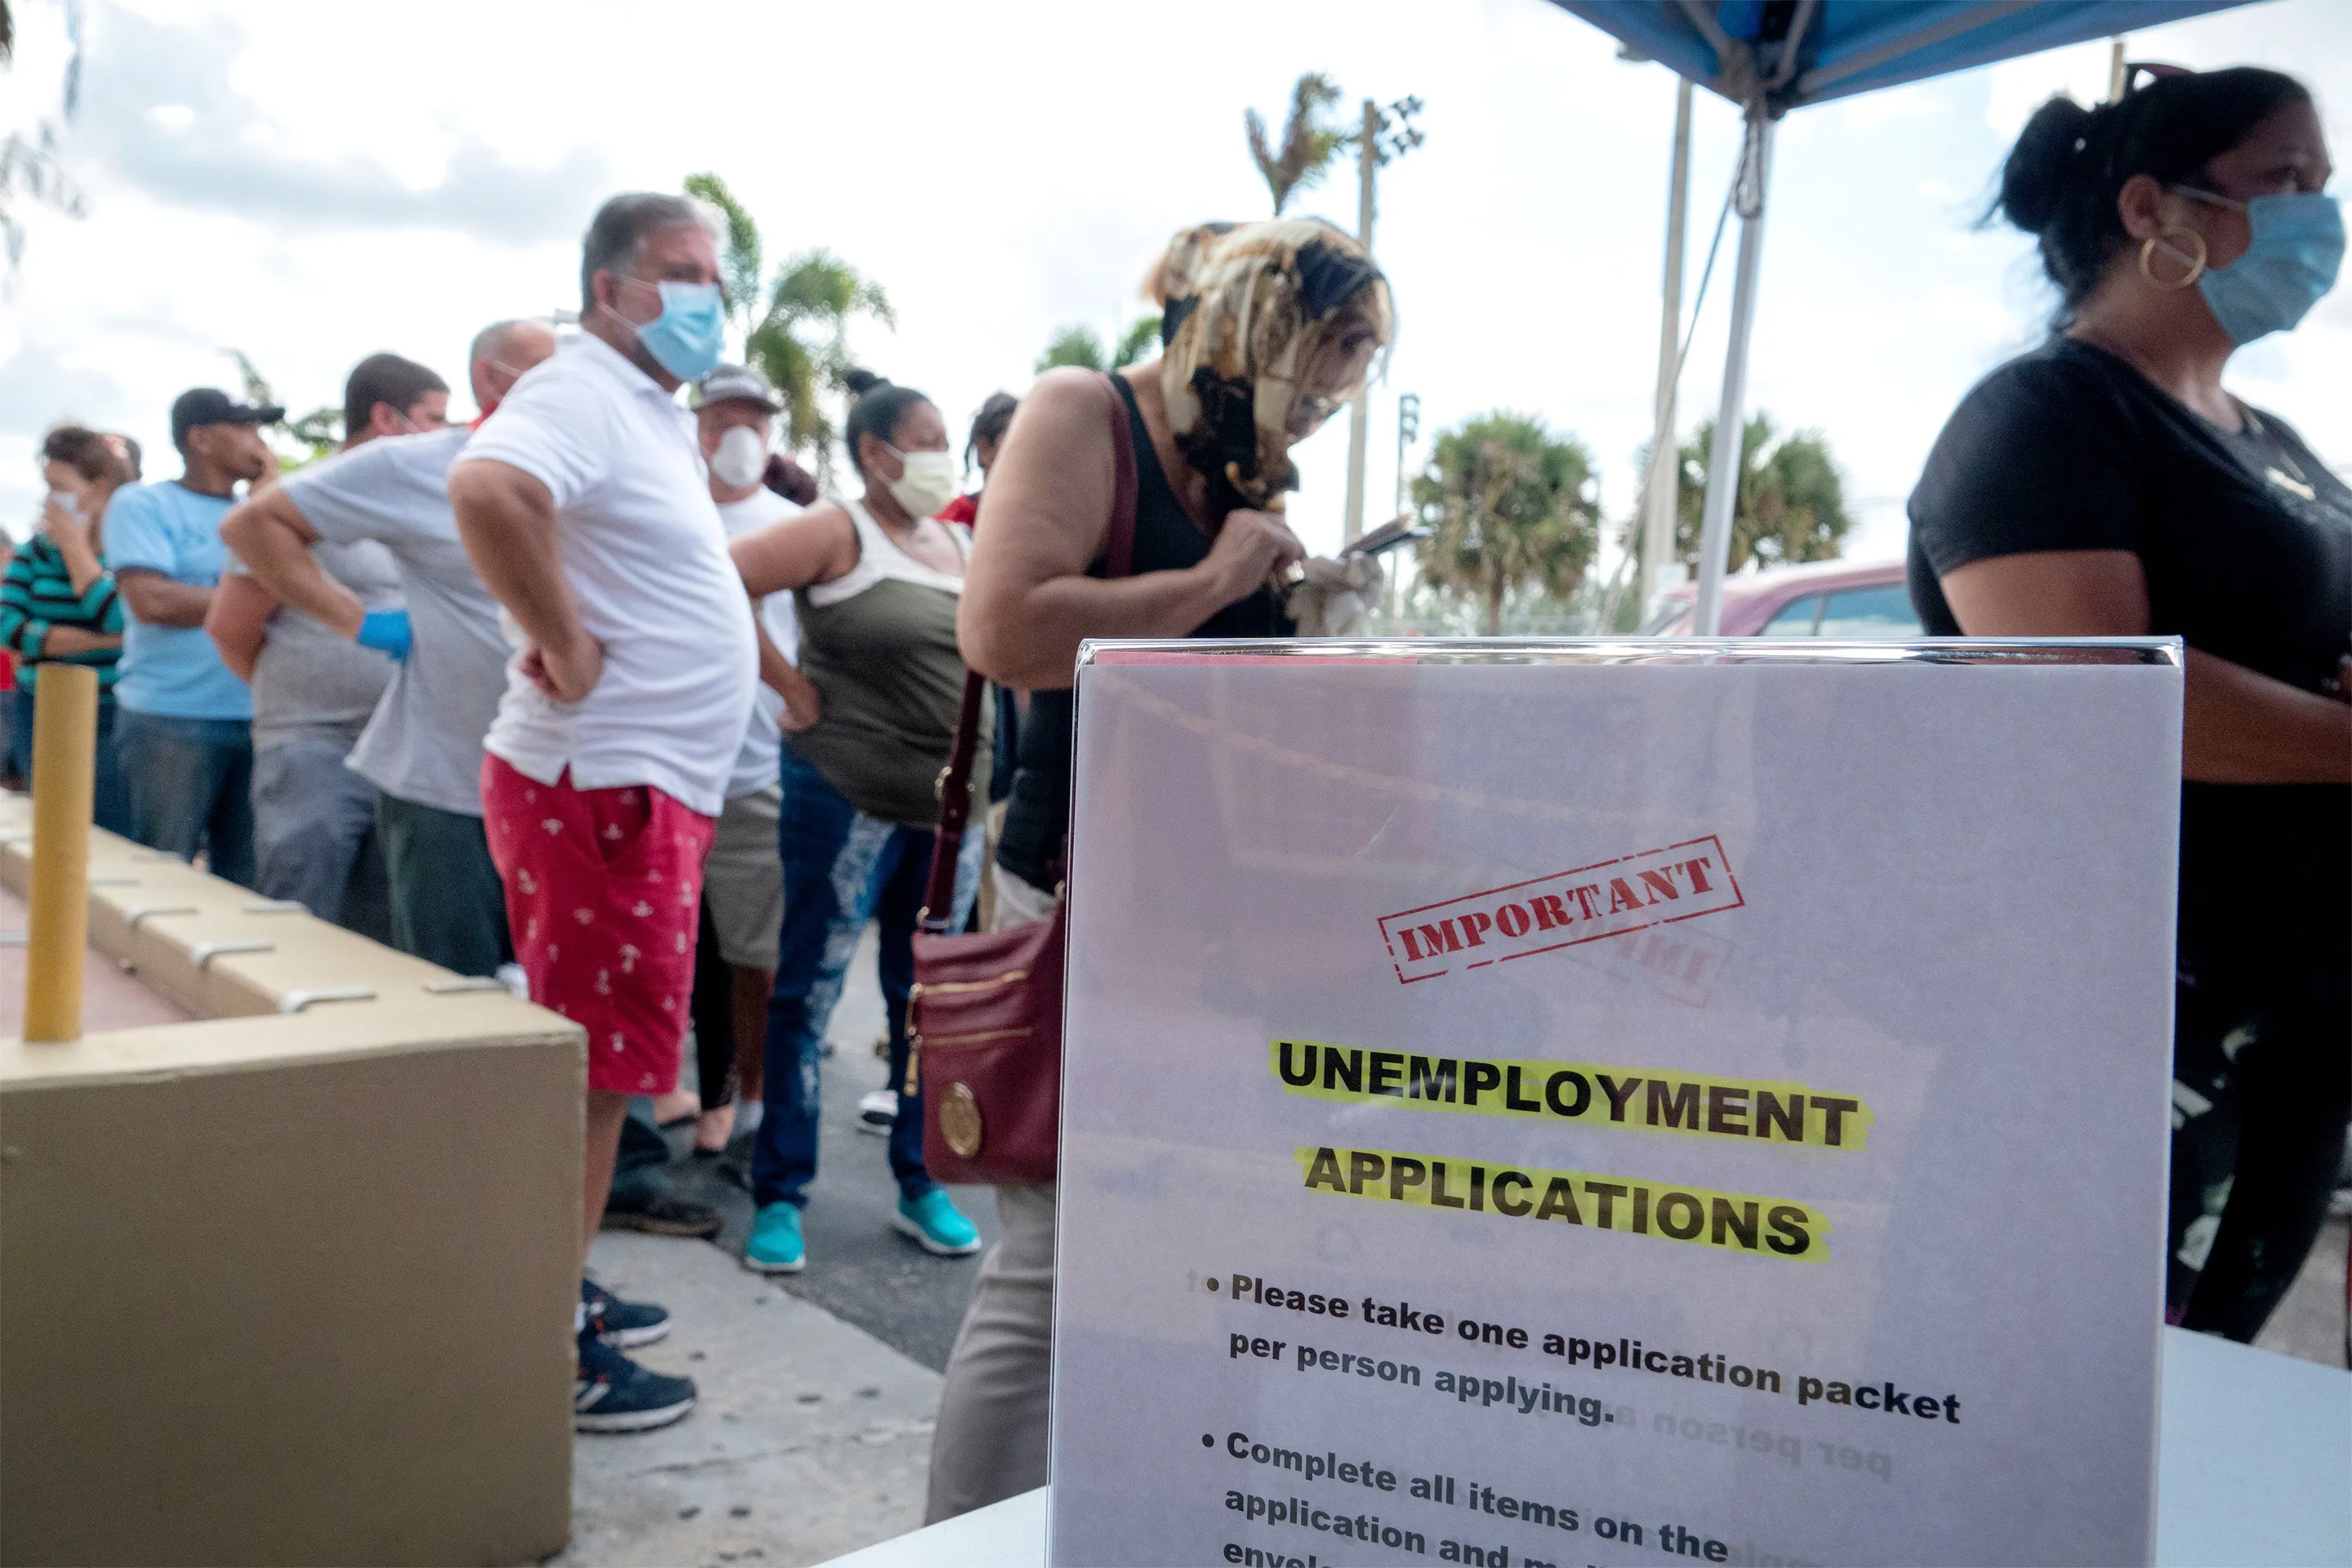 5 Numbers That Show the Unemployment Crisis Is Probably Even Worse Than You Think